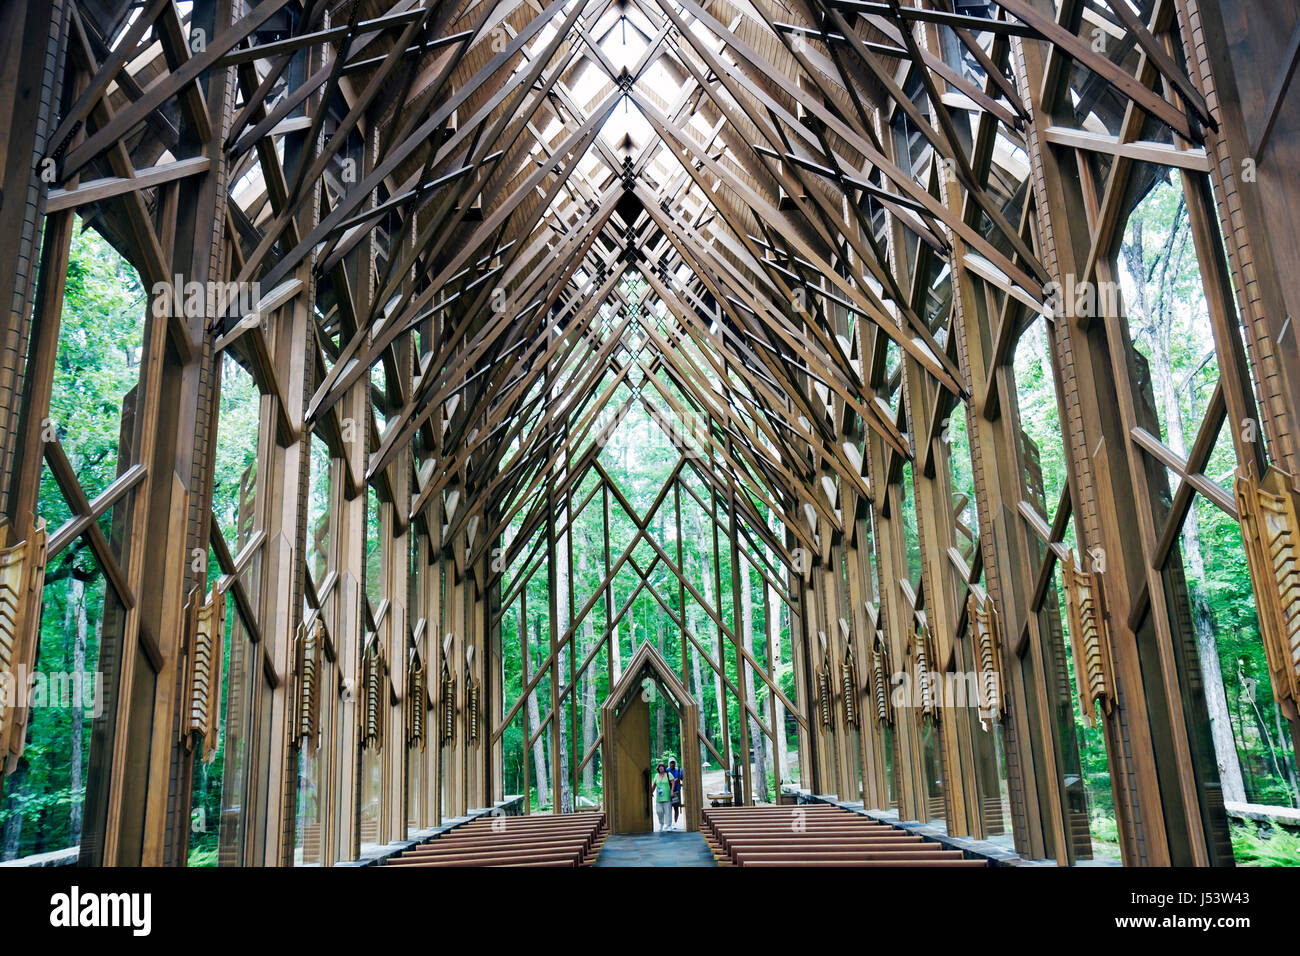 Arkansas Hot Springs Garvan Woodland Gardens,Anthony Cathedral church chapel wood glass vaulted ceiling,designer Jennings & McKee firm windows,nature Stock Photo